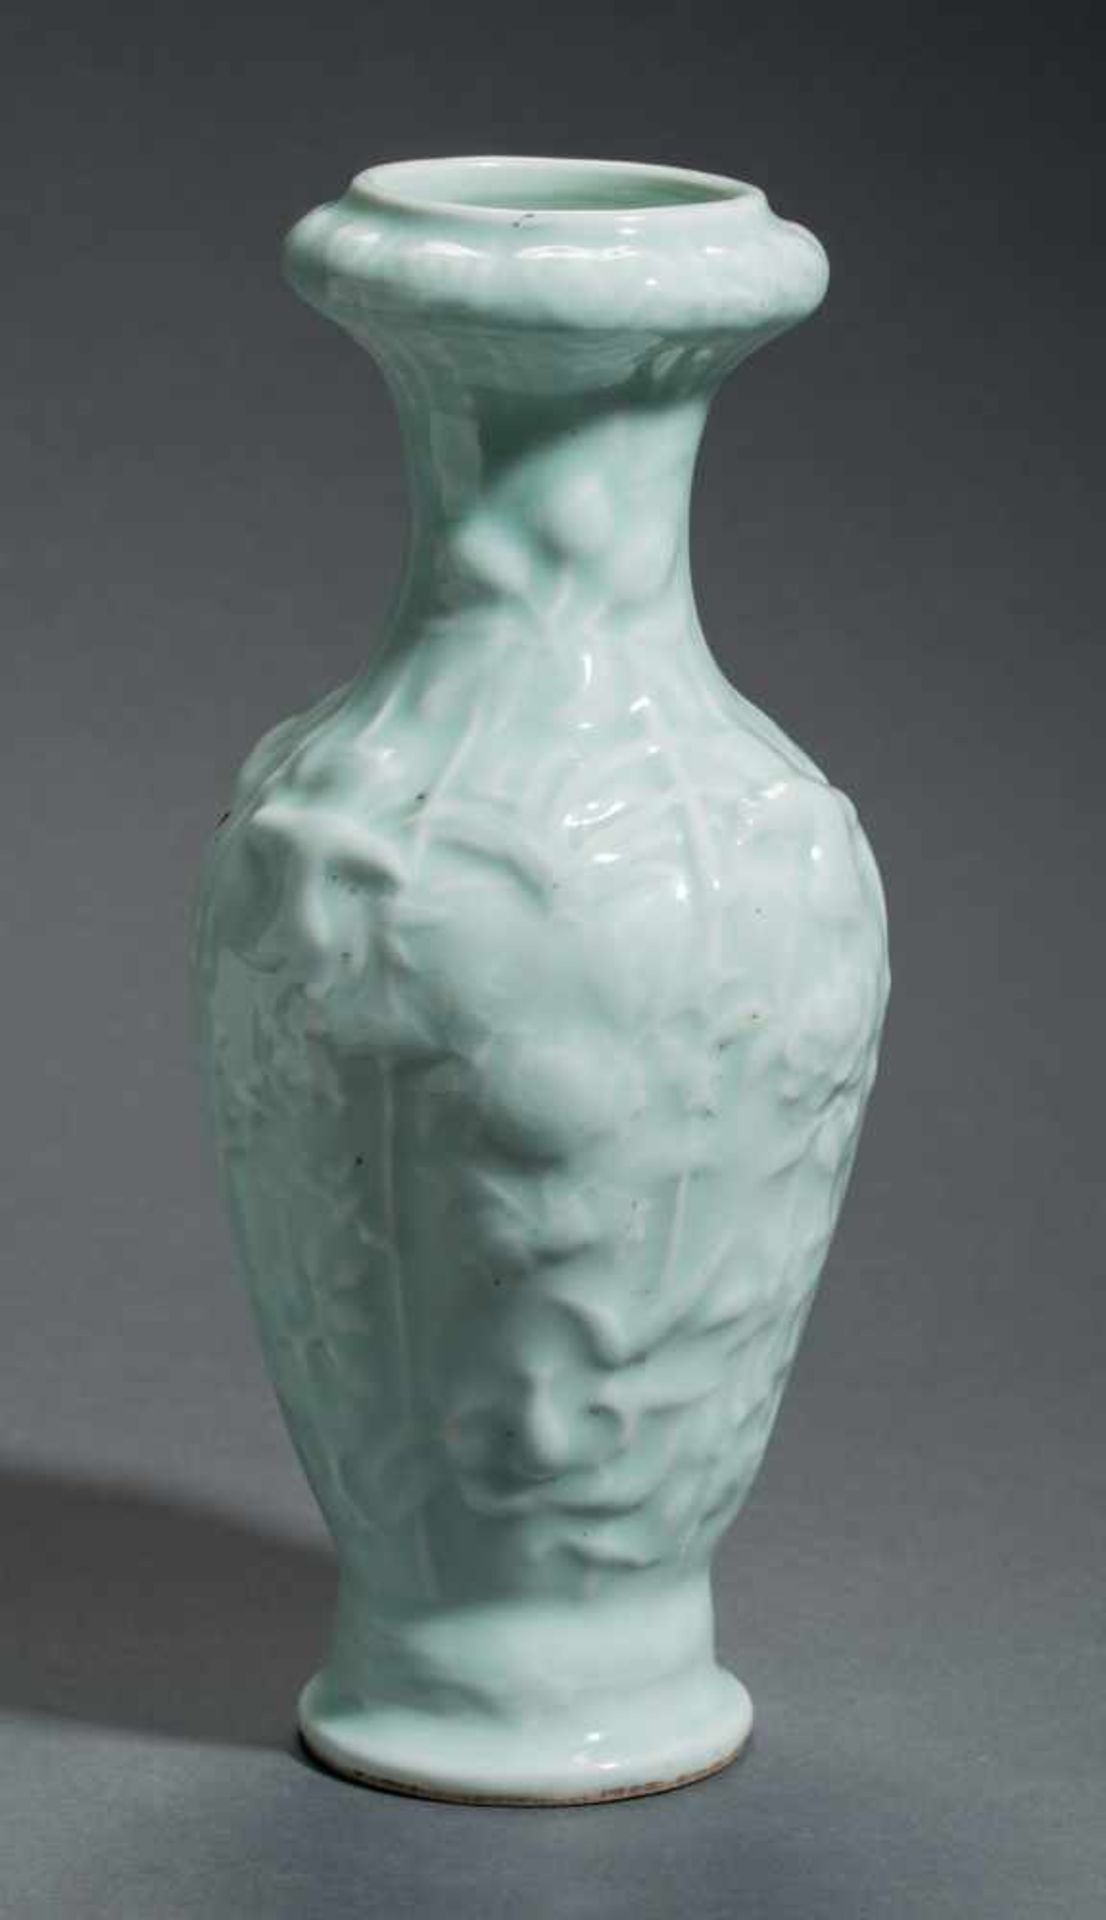 A LONGQUAN GLAZED VASE WITH HIGH RELIEFGlazed ceramic China, 20th century An attractive and